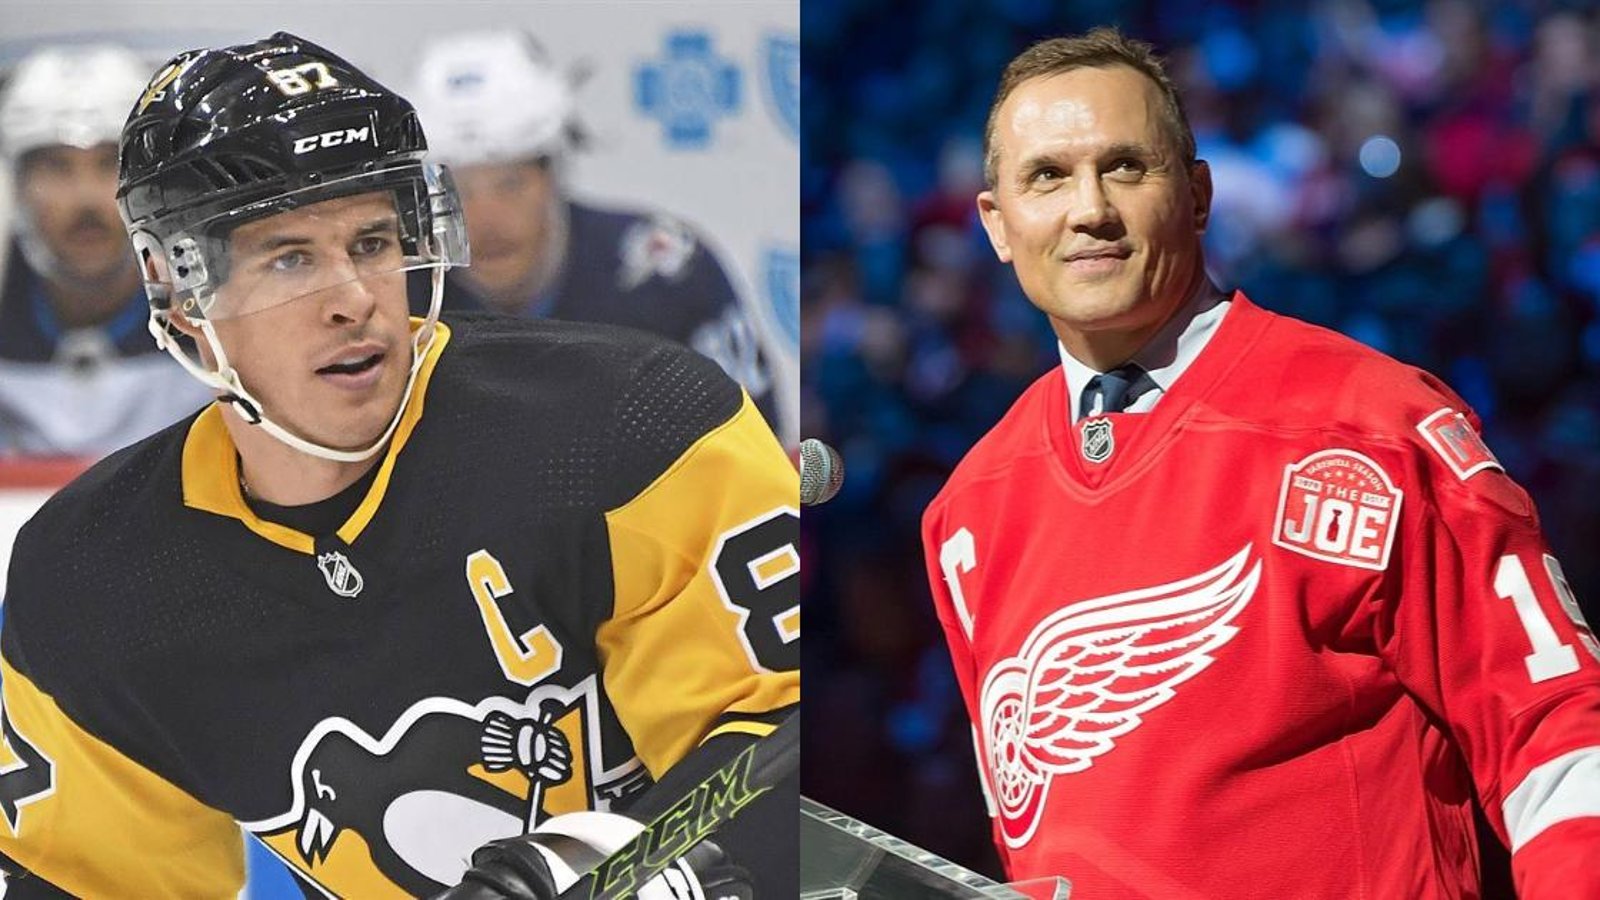 Sidney Crosby shares an amazing Steve Yzerman story after his 1000th game.